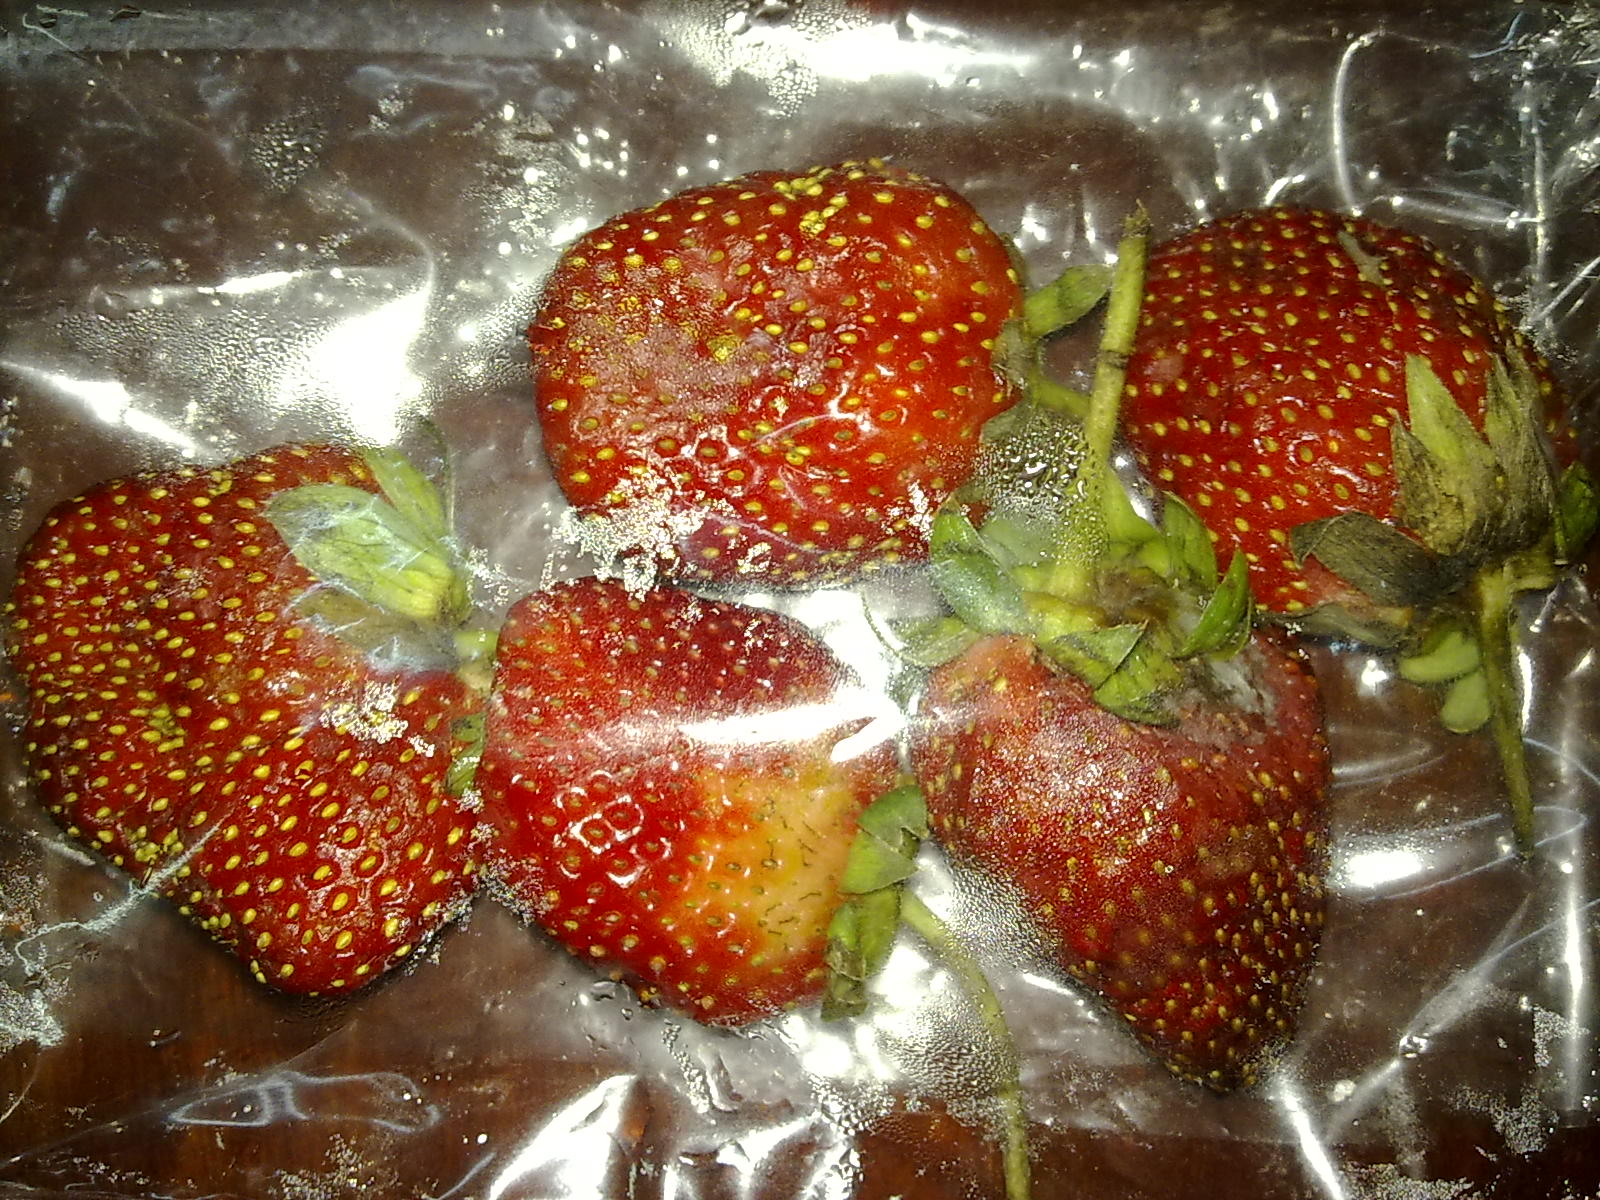 several strawberries sitting on plastic wrapped in plastic